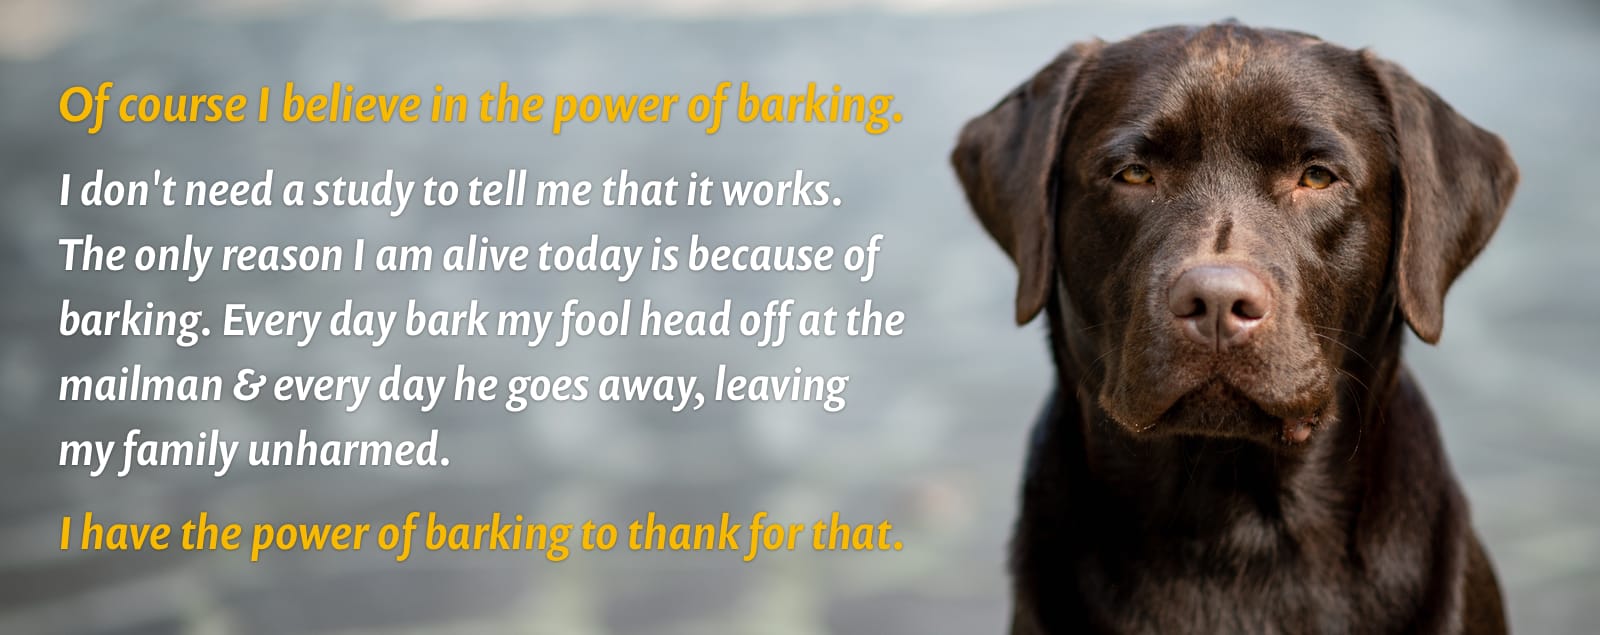 A photo of a handsome, serious-looking chocolate lab, with the caption: “Of course I believe in the power of barking. I don’t need a study to tell me that it works. The only reason I am alive today is because of barking. Every day I bark my fool head off at the mailman. Every day he goes away, leaving my family unharmed.”